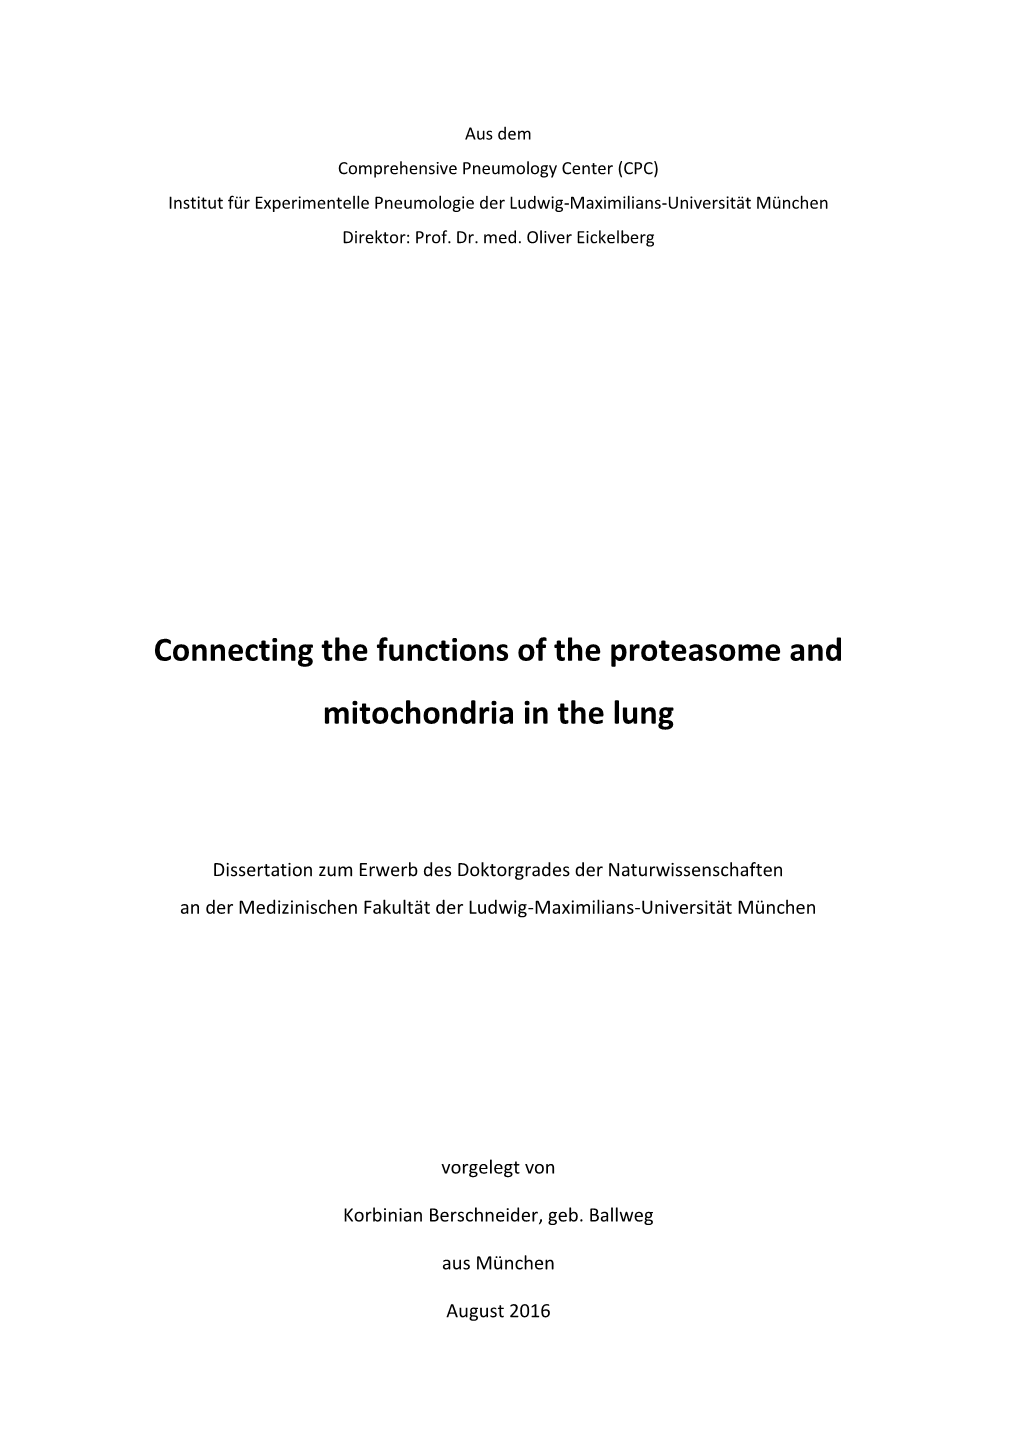 Connecting the Functions of the Proteasome and Mitochondria in the Lung